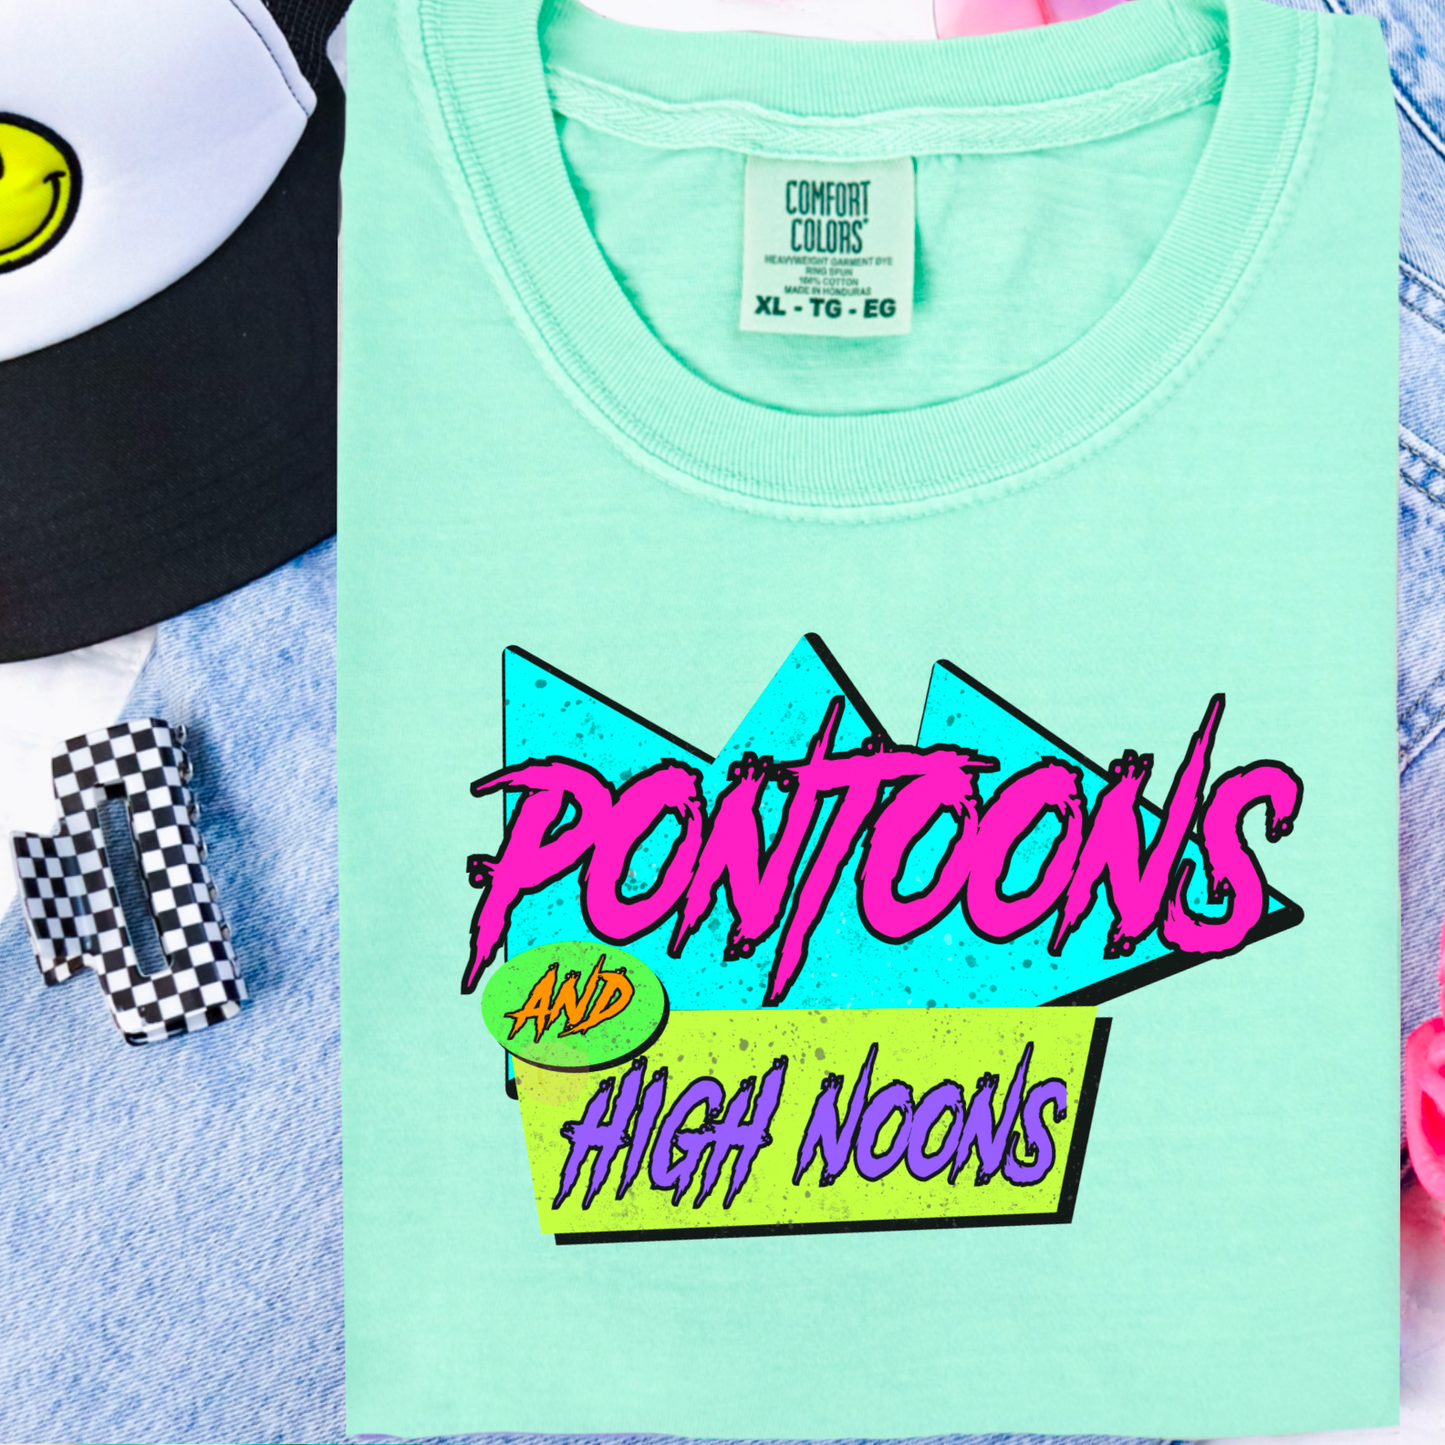 Pontoon’s And High Noons  Comfort Color Graphic Tee